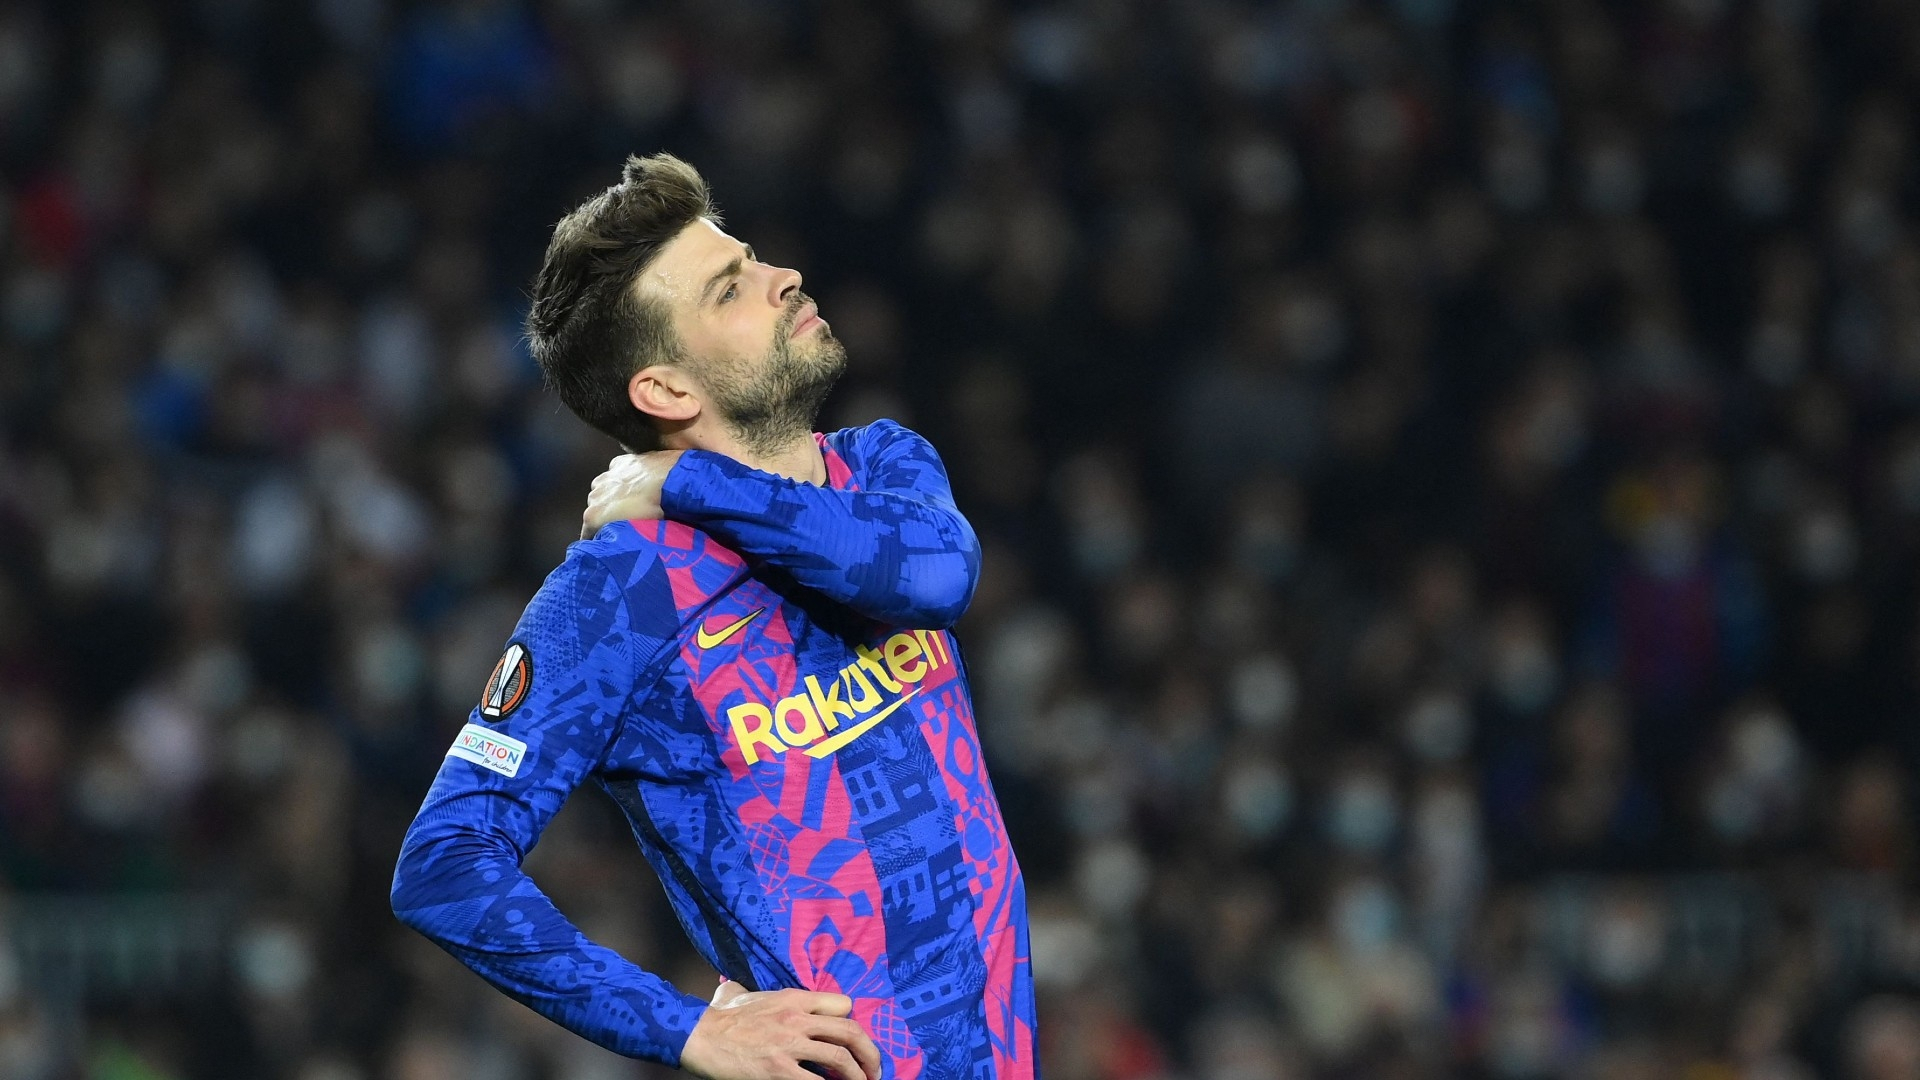 1920x1080 It hurts not having fans on our side' Pique frustrated with whistling as he backs Barca to win Europa League